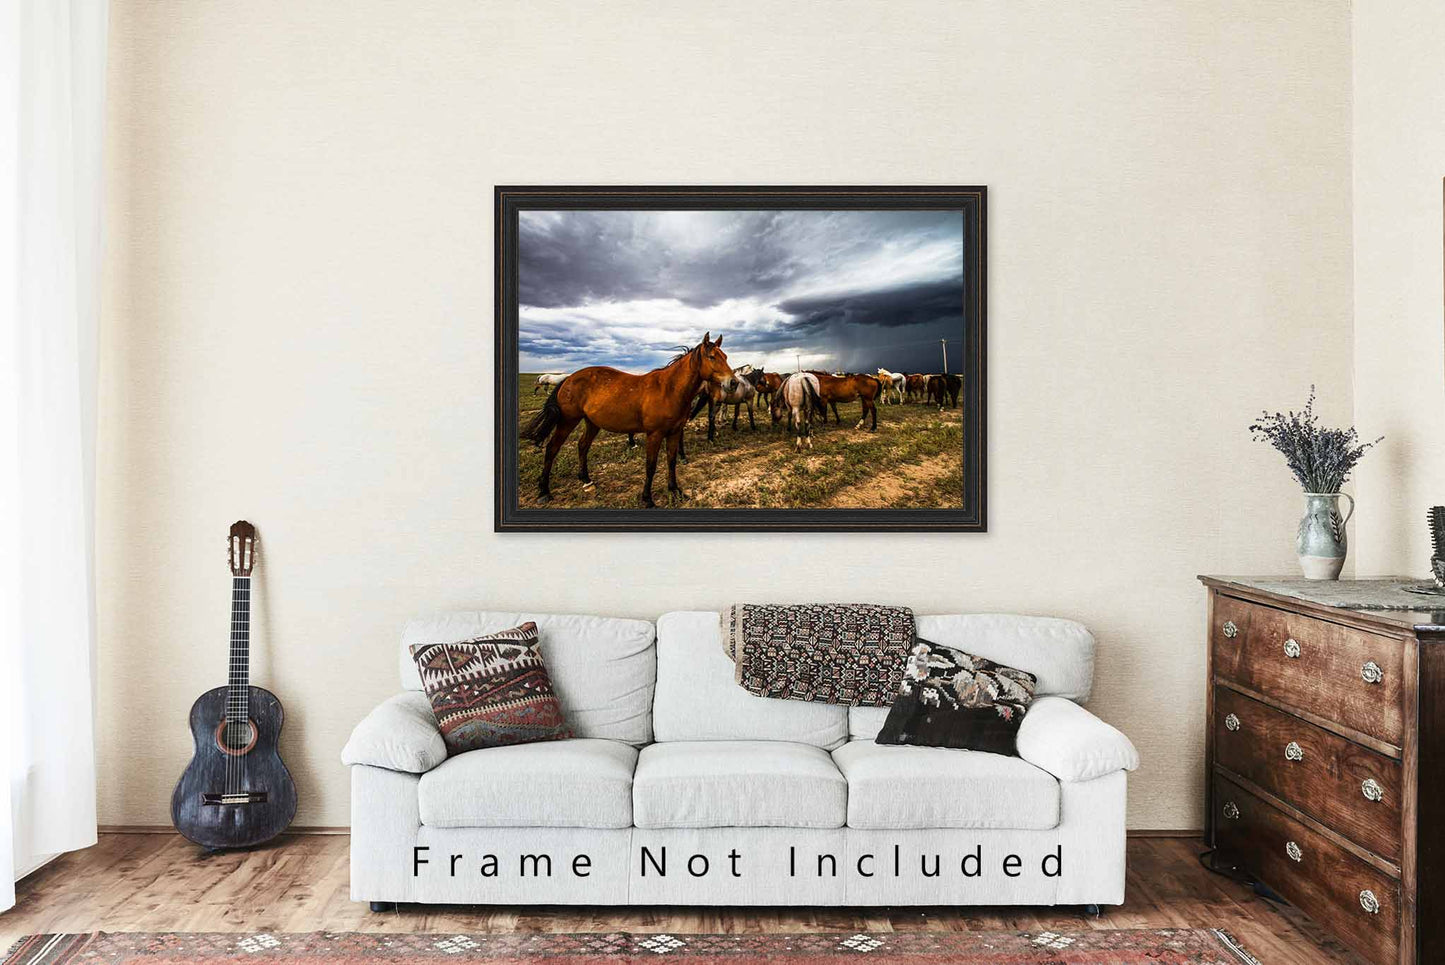 Horse Photography Print | Equine Picture | Farm and Ranch Wall Art | Oklahoma Photo | Western Decor | Not Framed